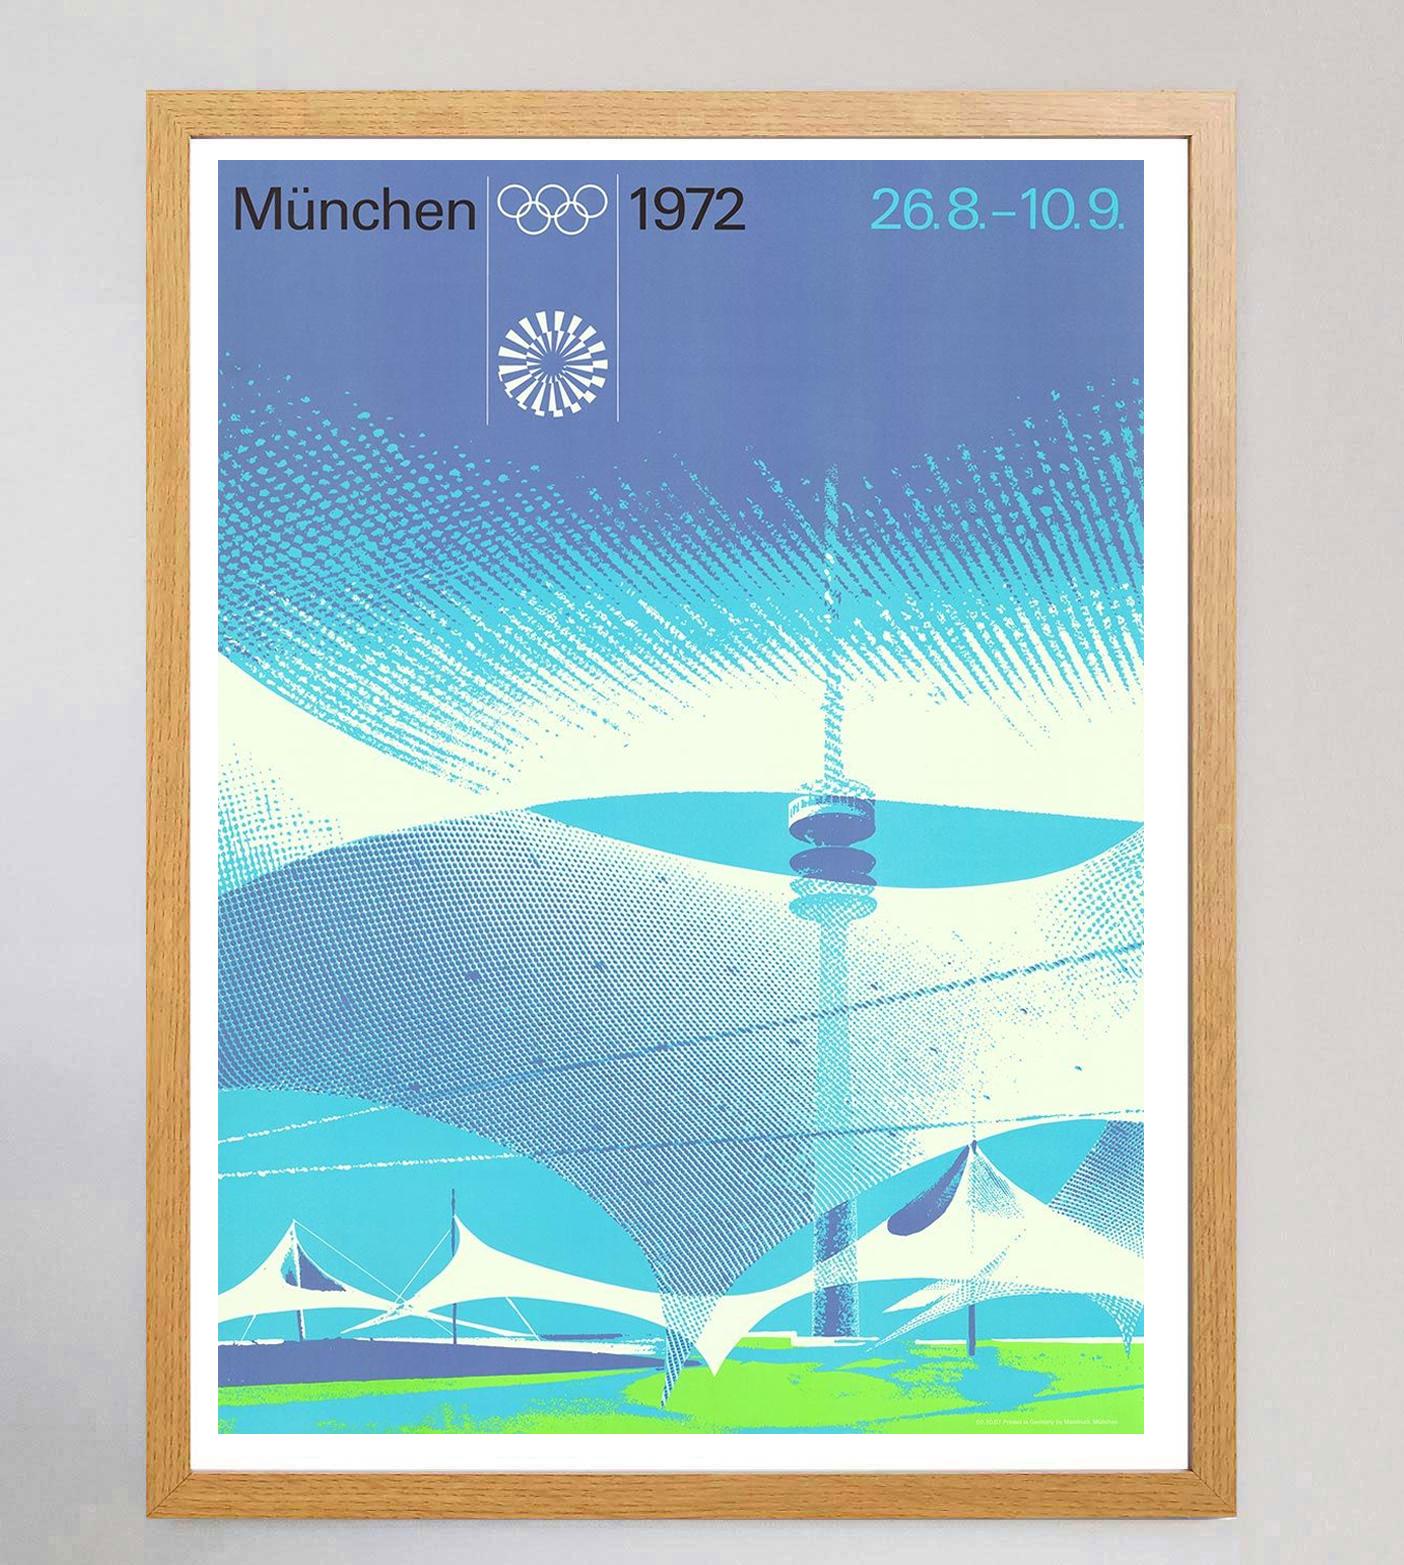 German graphic designer Otl Aicher lead the design team of the 1972 Munich Olympic Games, including designing this gorgeous poster featuring the Olympic Stadium. The Games were the second to be held in Germany after the 1936 games in Berlin which